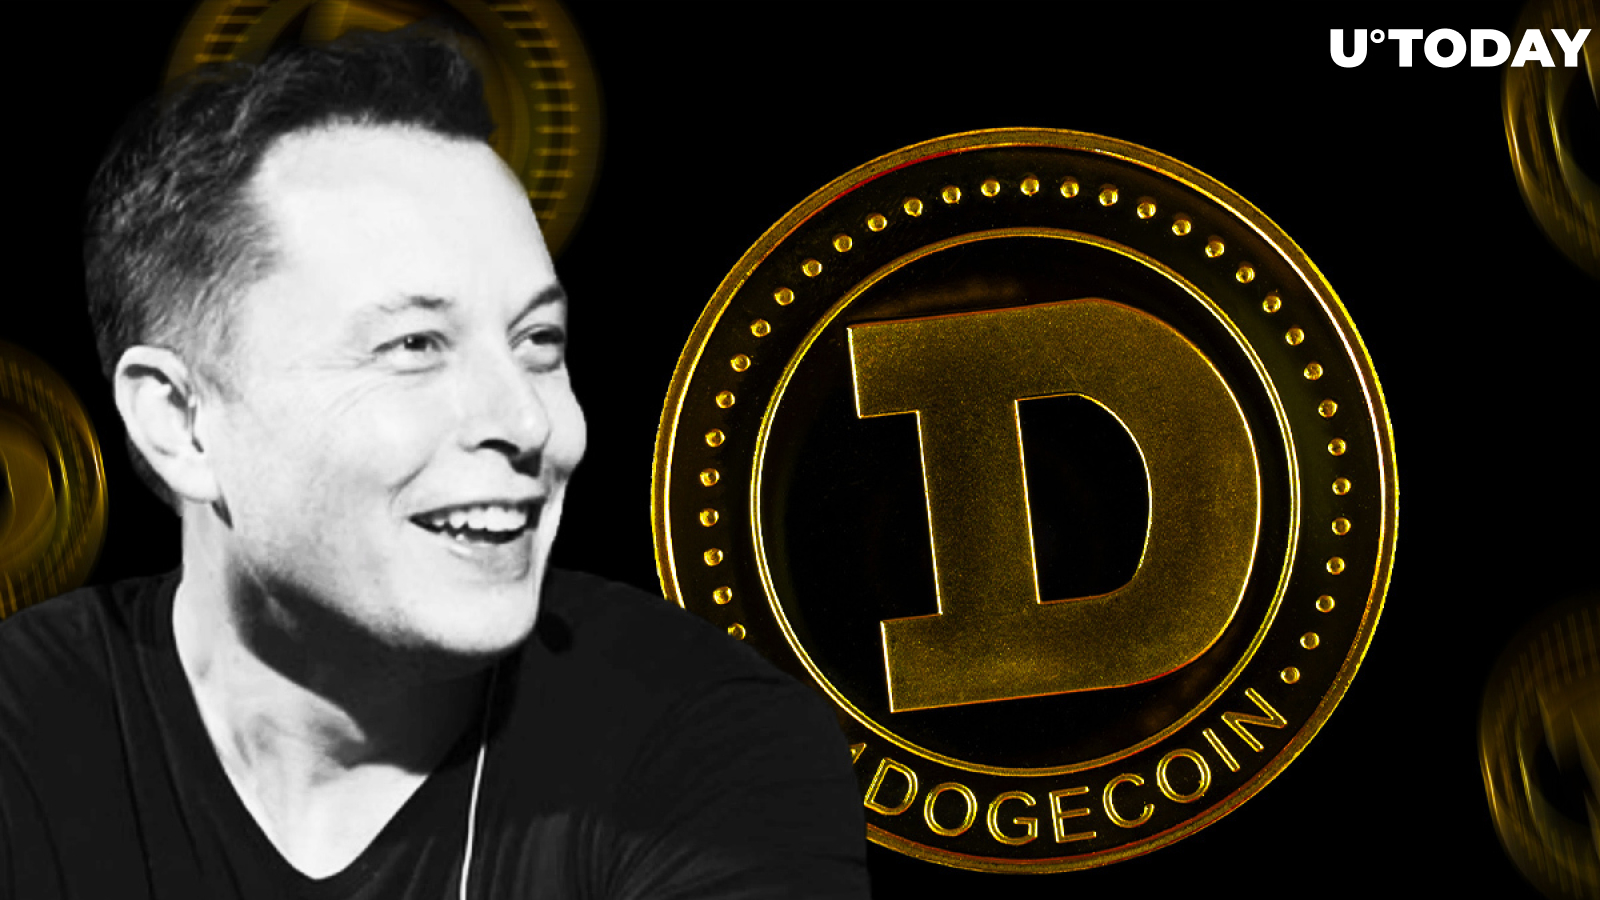 Dogecoin Plunges 20 Percent After This Elon Musk Tweet